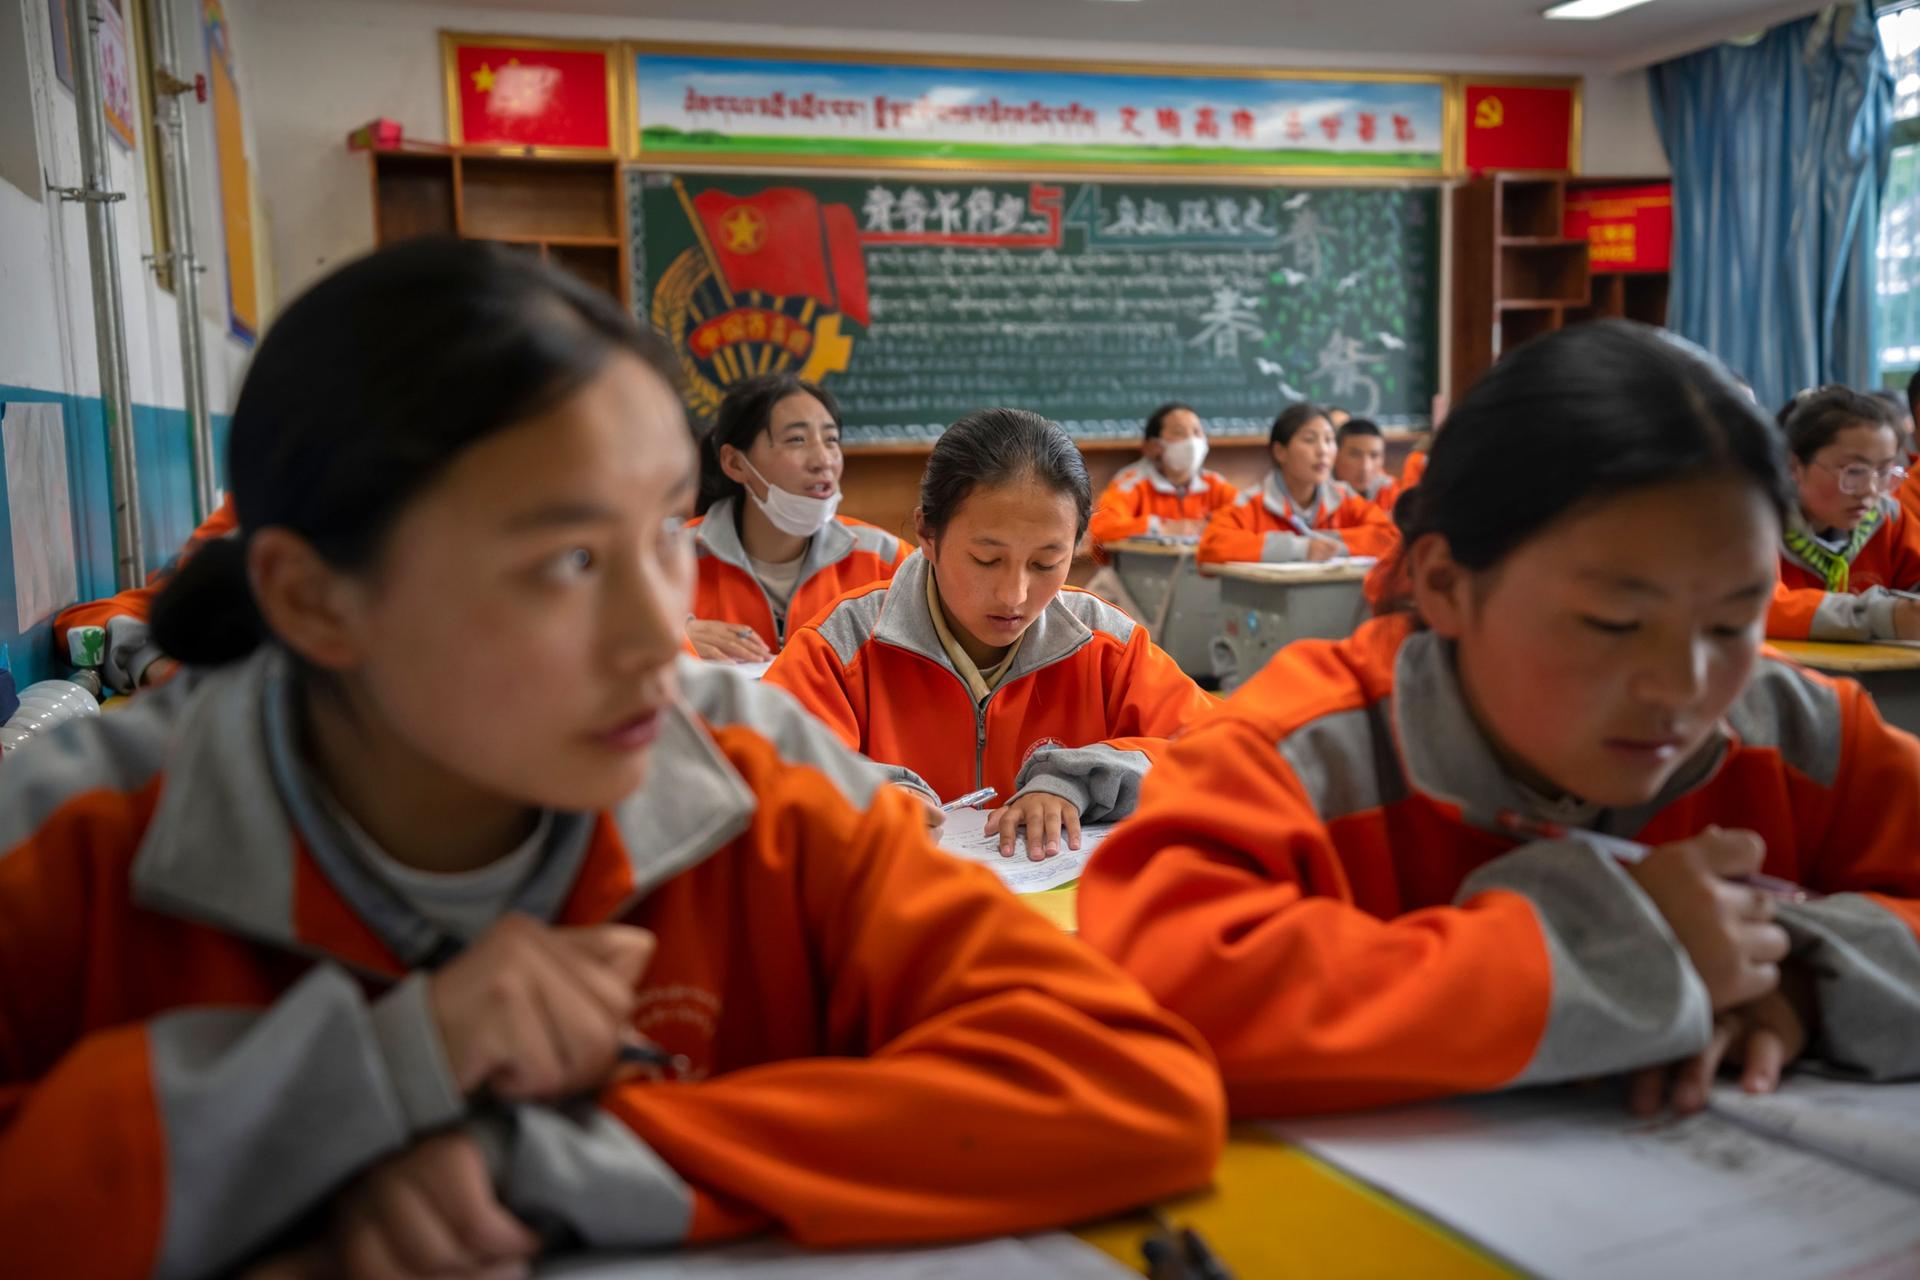 Students recite vocabulary during a Mandarin Chinese class at Nagqu No. 2 Senior High School, a public boarding school for students from northern Tibet, in Lhasa in western China's Tibet Autonomous Region, as seen during a rare government-led tour of the 